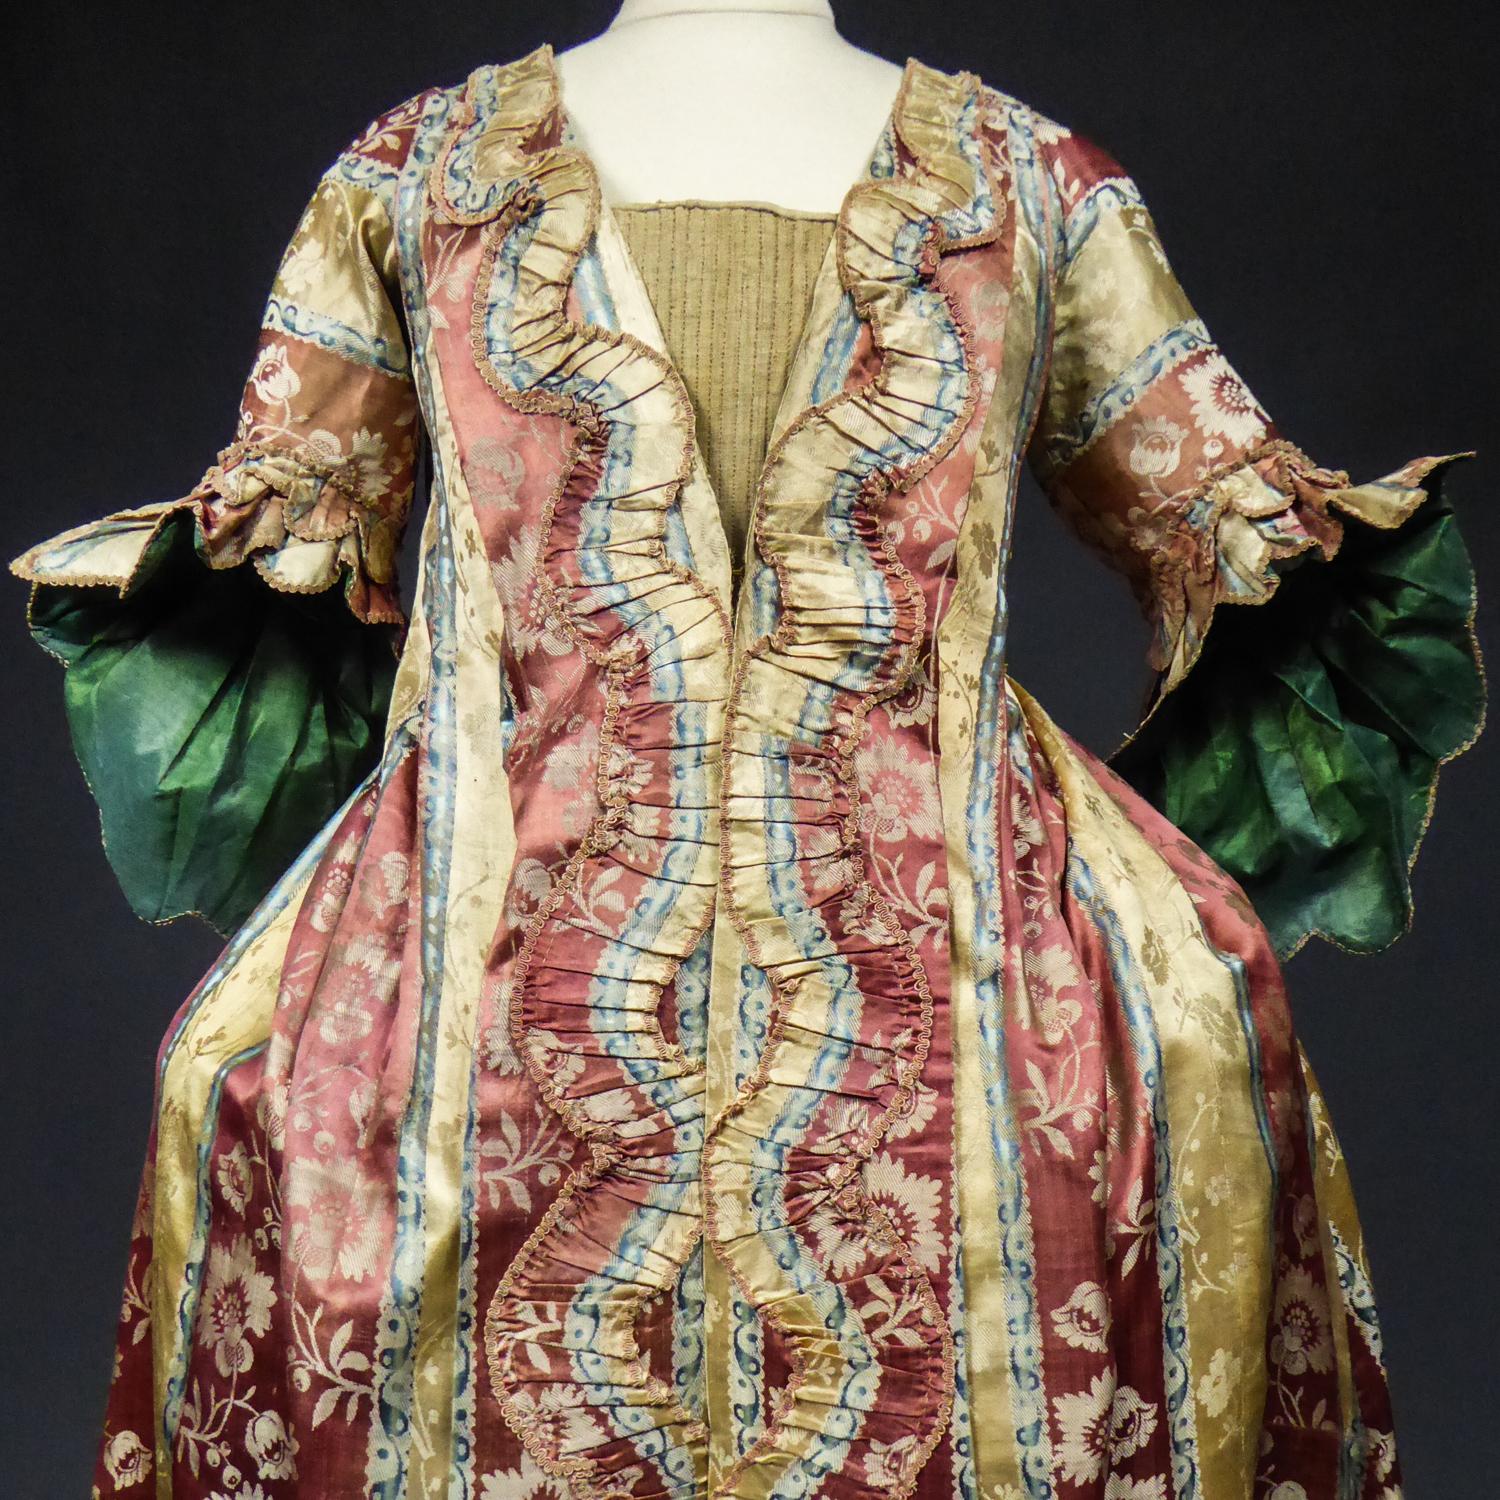 Circa 1740/1760
France

Rare Louis XV robe volante (or flying dress) or interior coat between 1740 and 1760. Shaded satin damask with wide stripes adorned with floral garlands in brick, sky-blue, straw-yellow and cream tones. Typical pyramidal cut